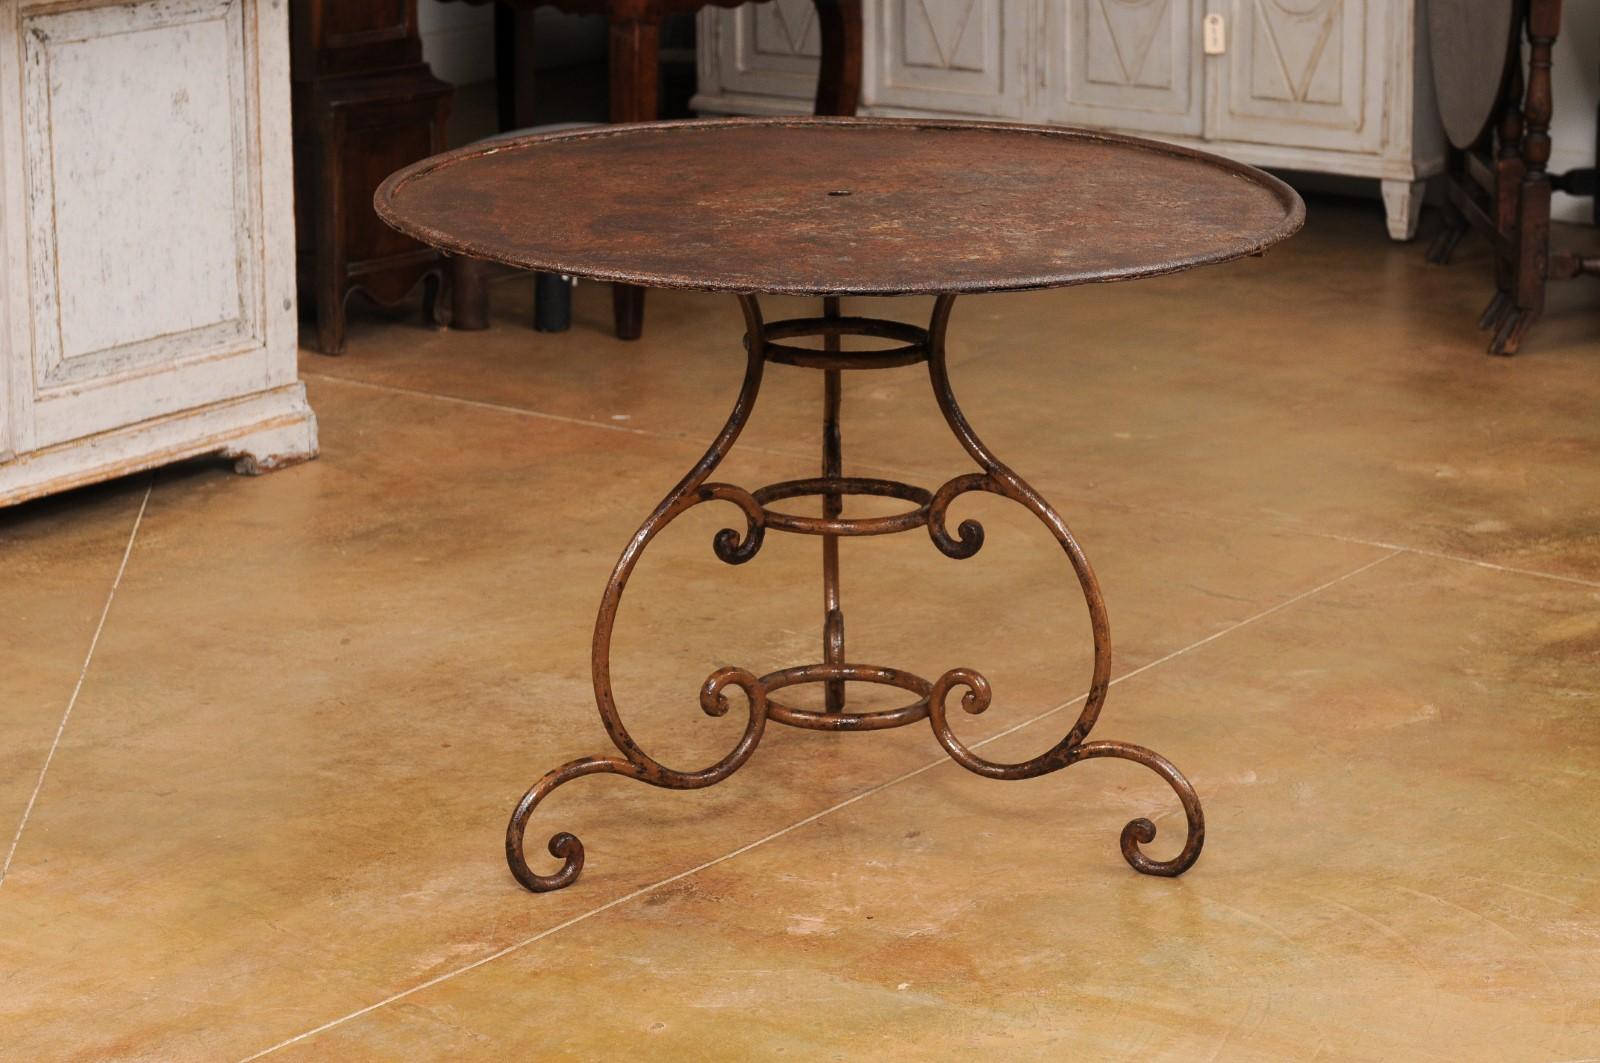 French 19th Century Round Iron Garden Table with Scrolling Base and Rusty Finish For Sale 3